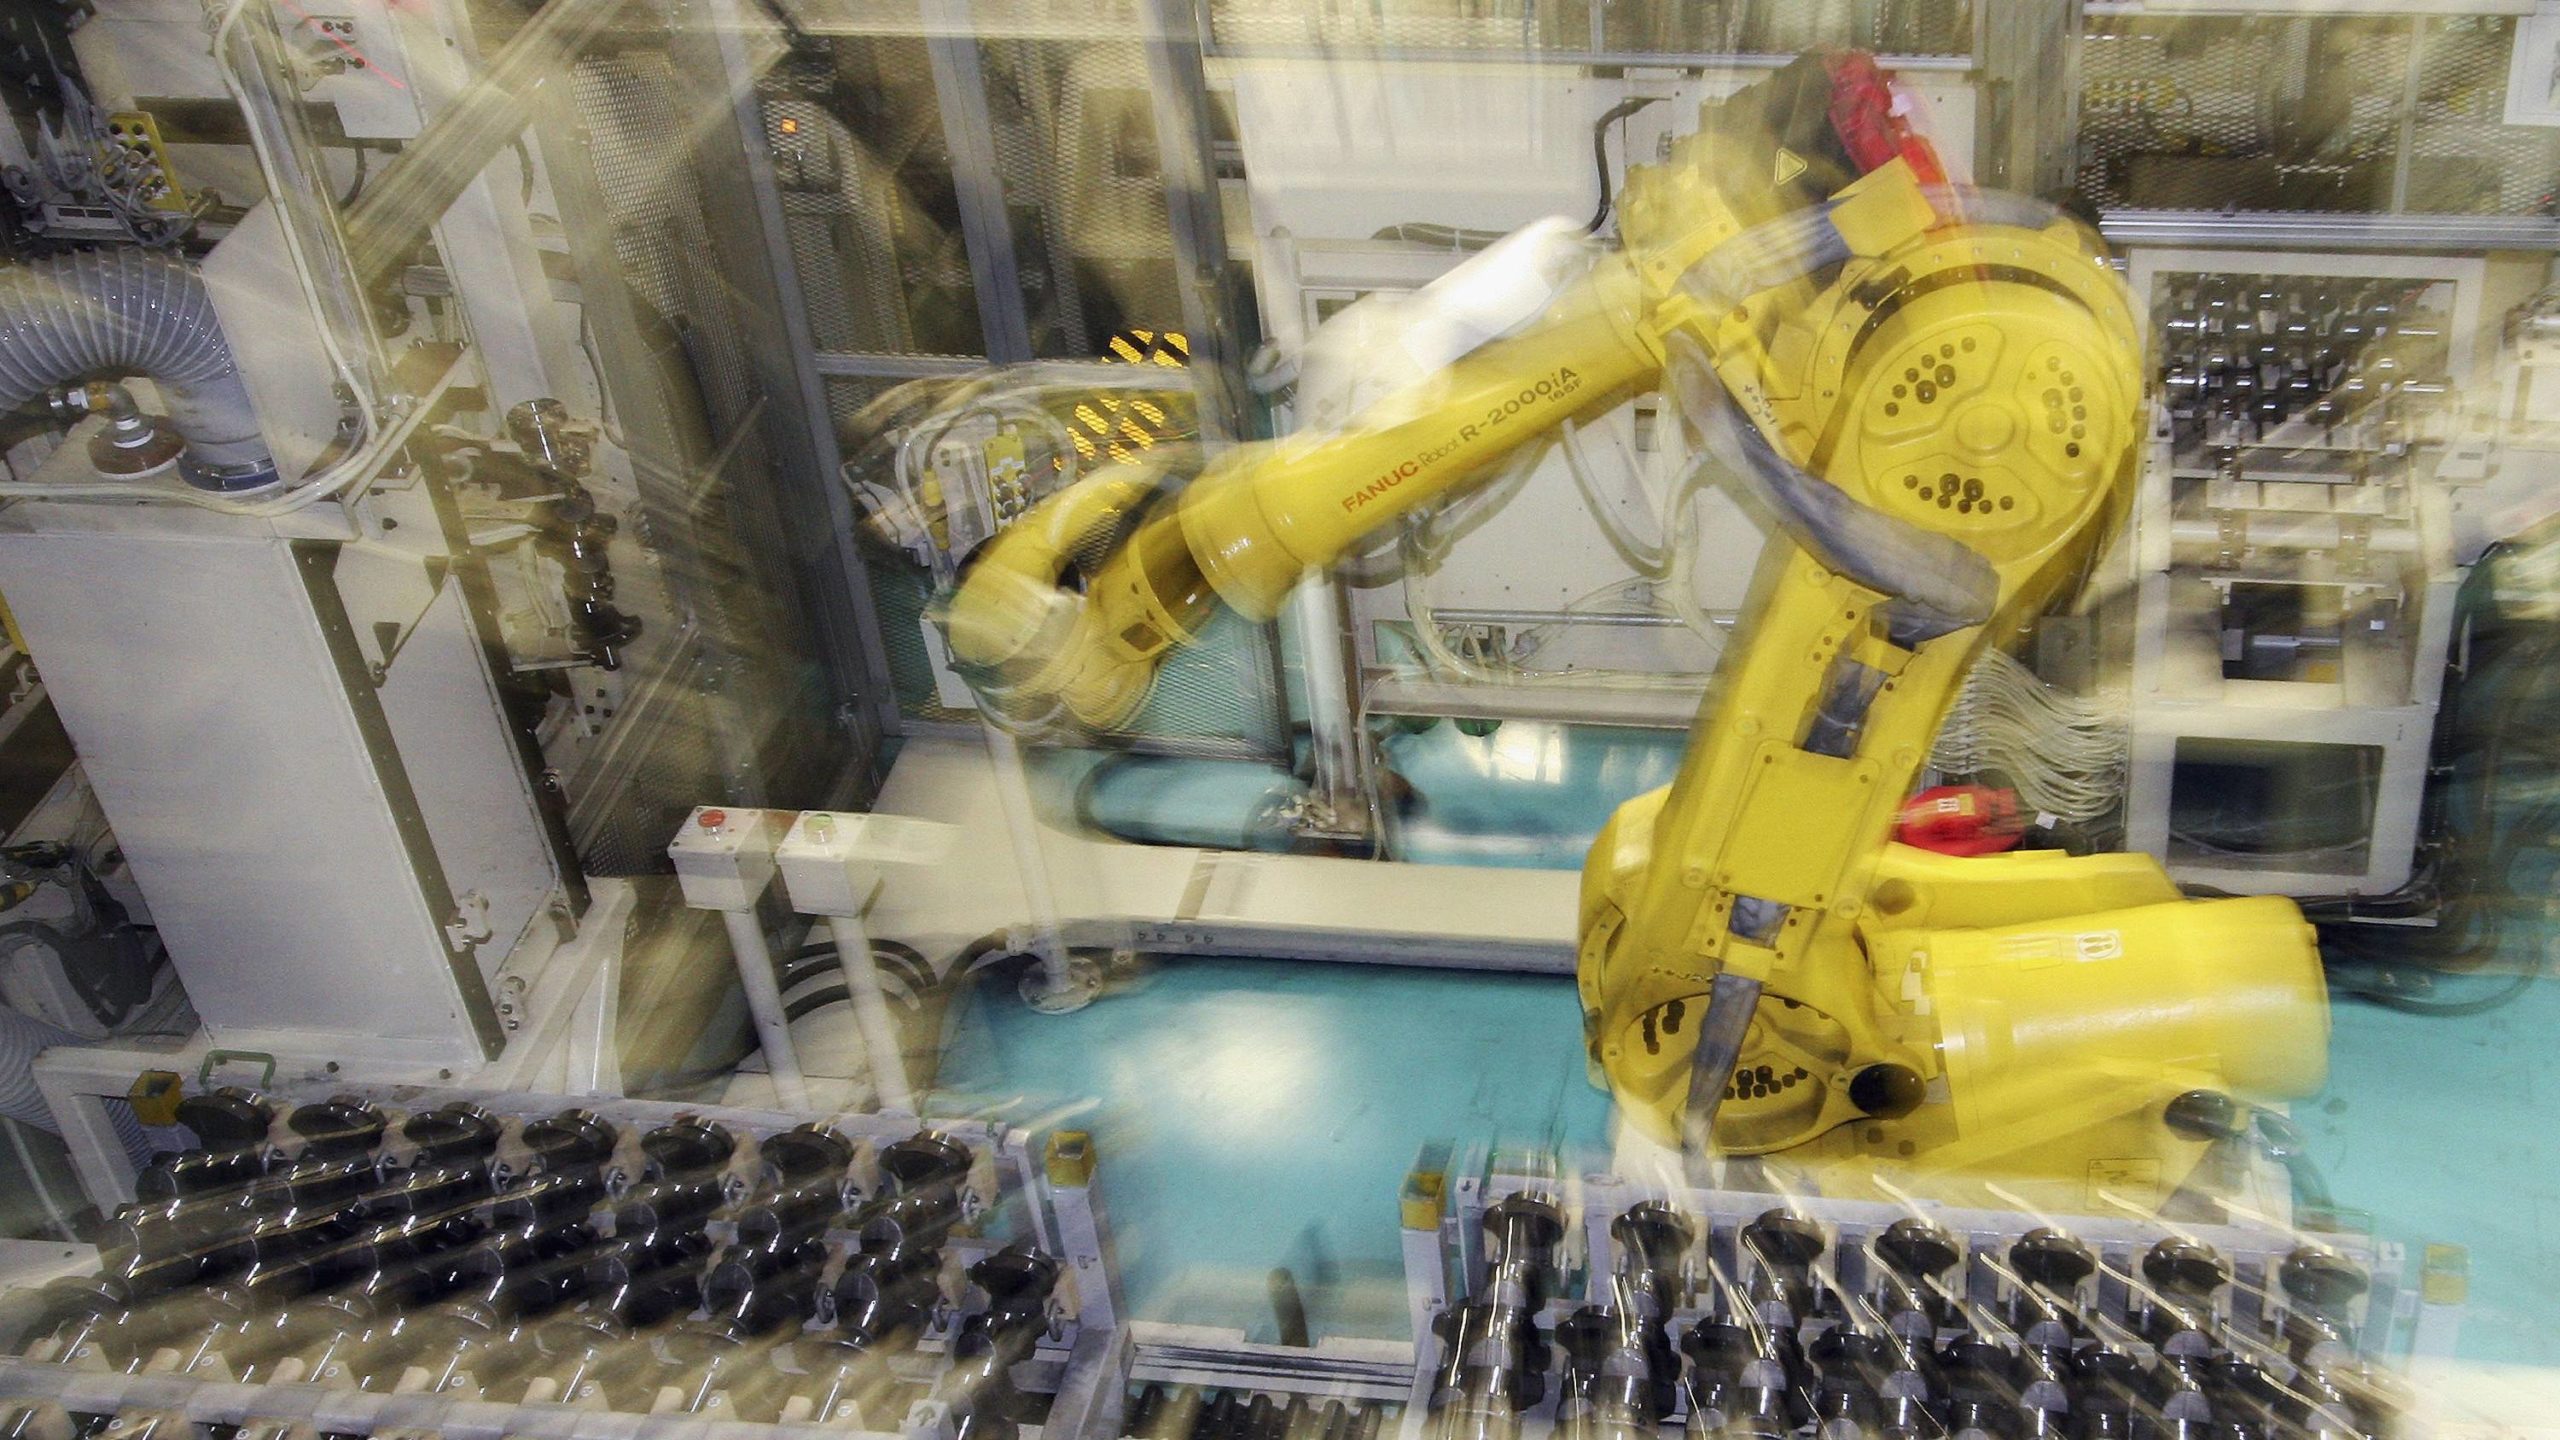 18 Gorgeous Images Of Job-Stealing Factory Robots